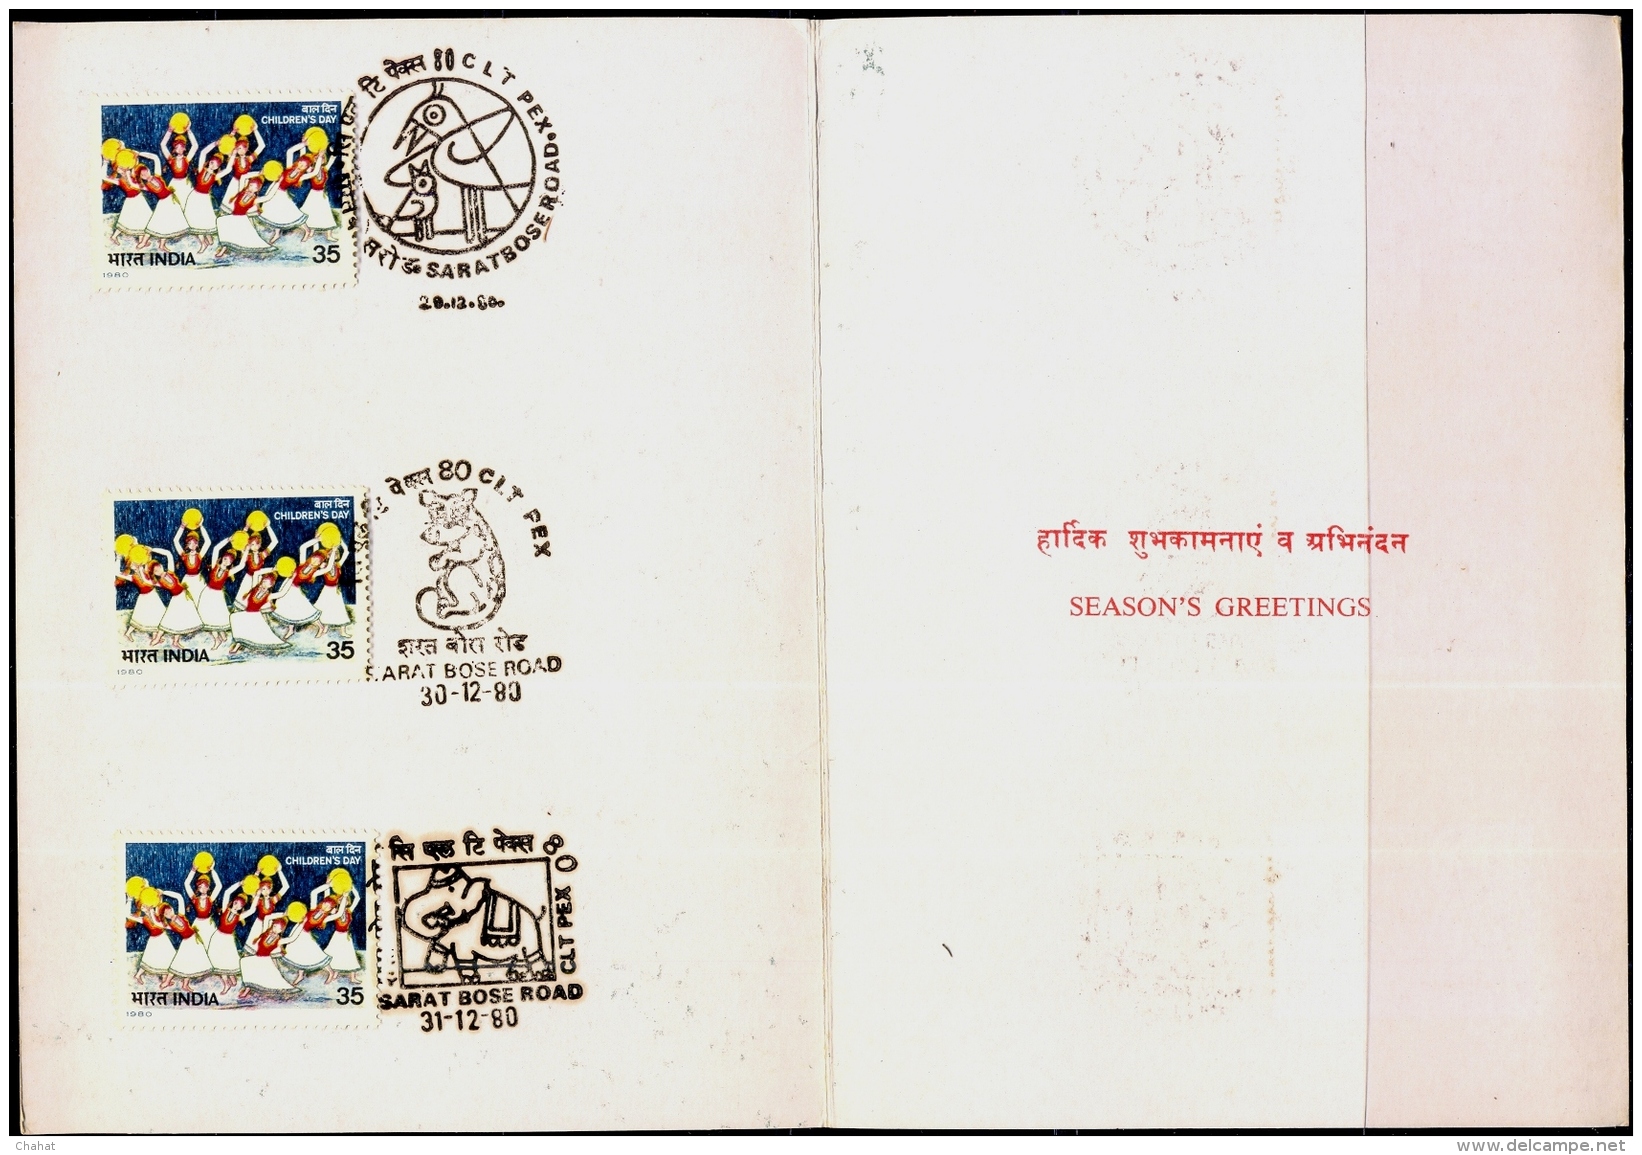 CHILDRENS DAY-1980-INDIA POSTAGE GREETING CARD WITH EVENT CANCELLATIONS &amp; BOOKLET-ERROR-EXTREMELY SCARCE-MNH-M-159 - Plaatfouten En Curiosa